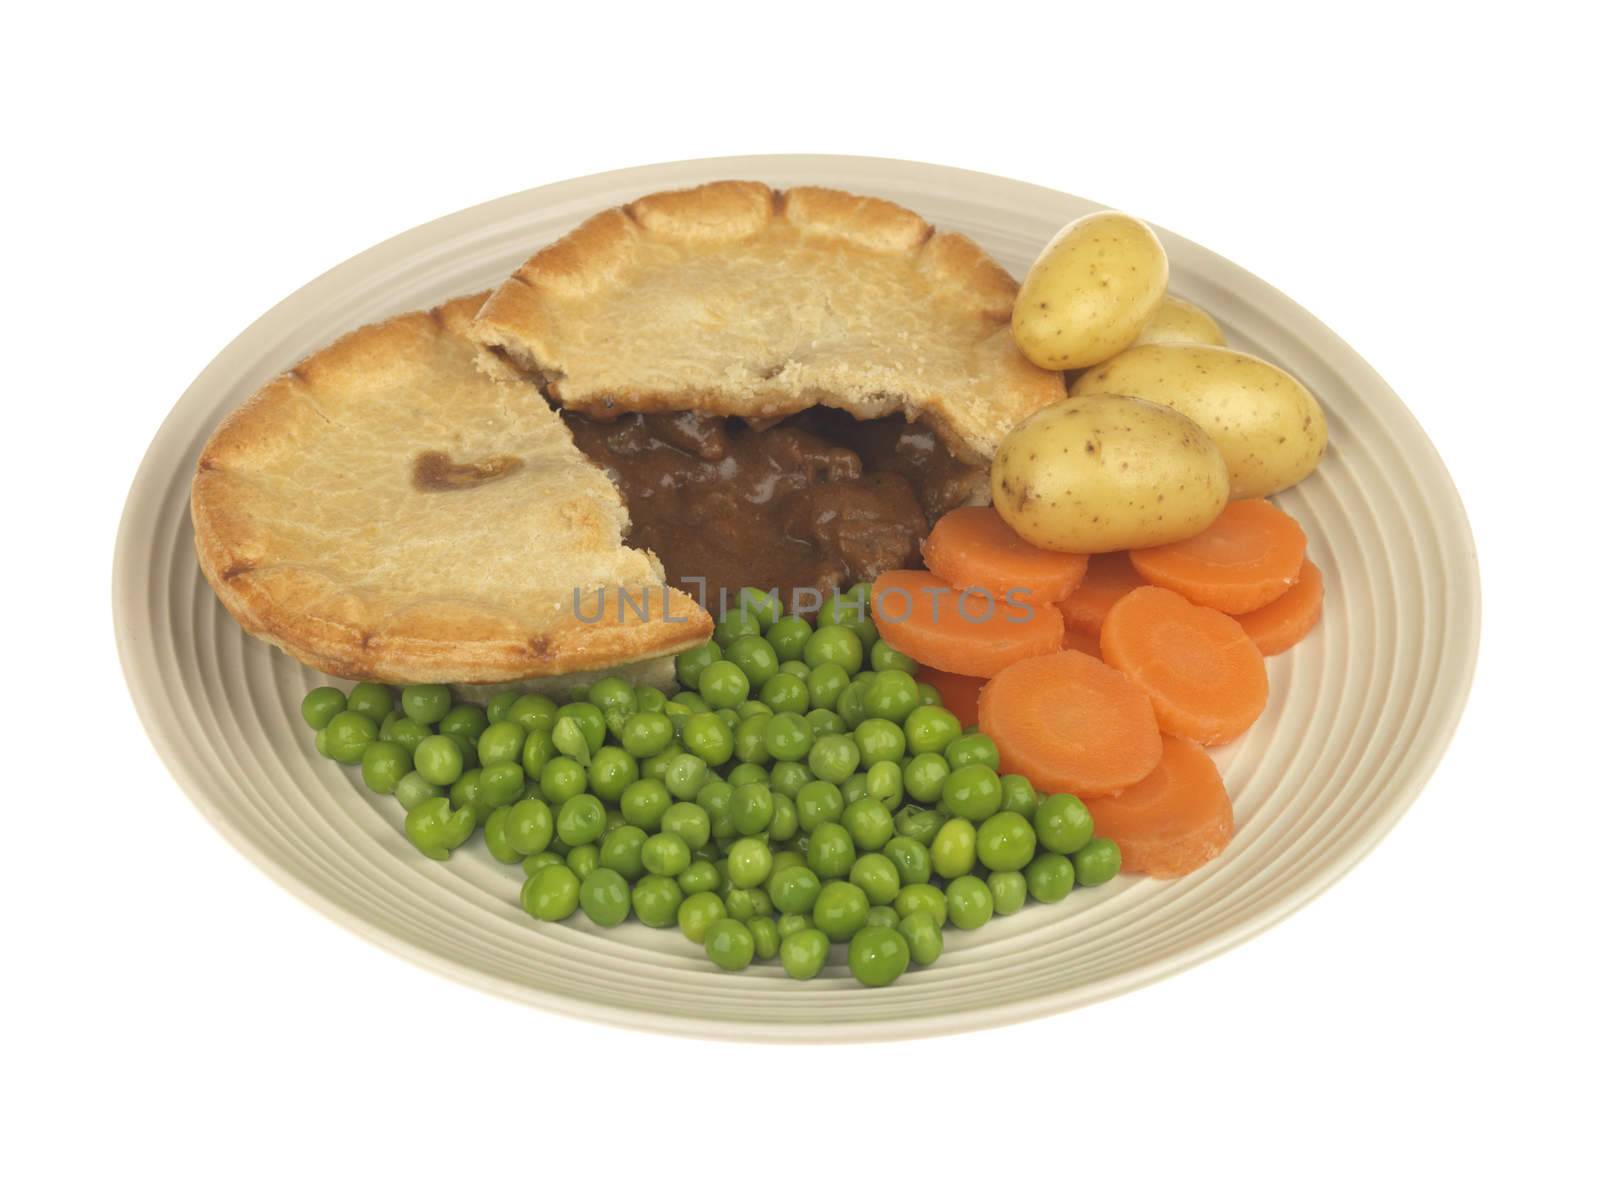 Steak Pie with Vegetables by Whiteboxmedia